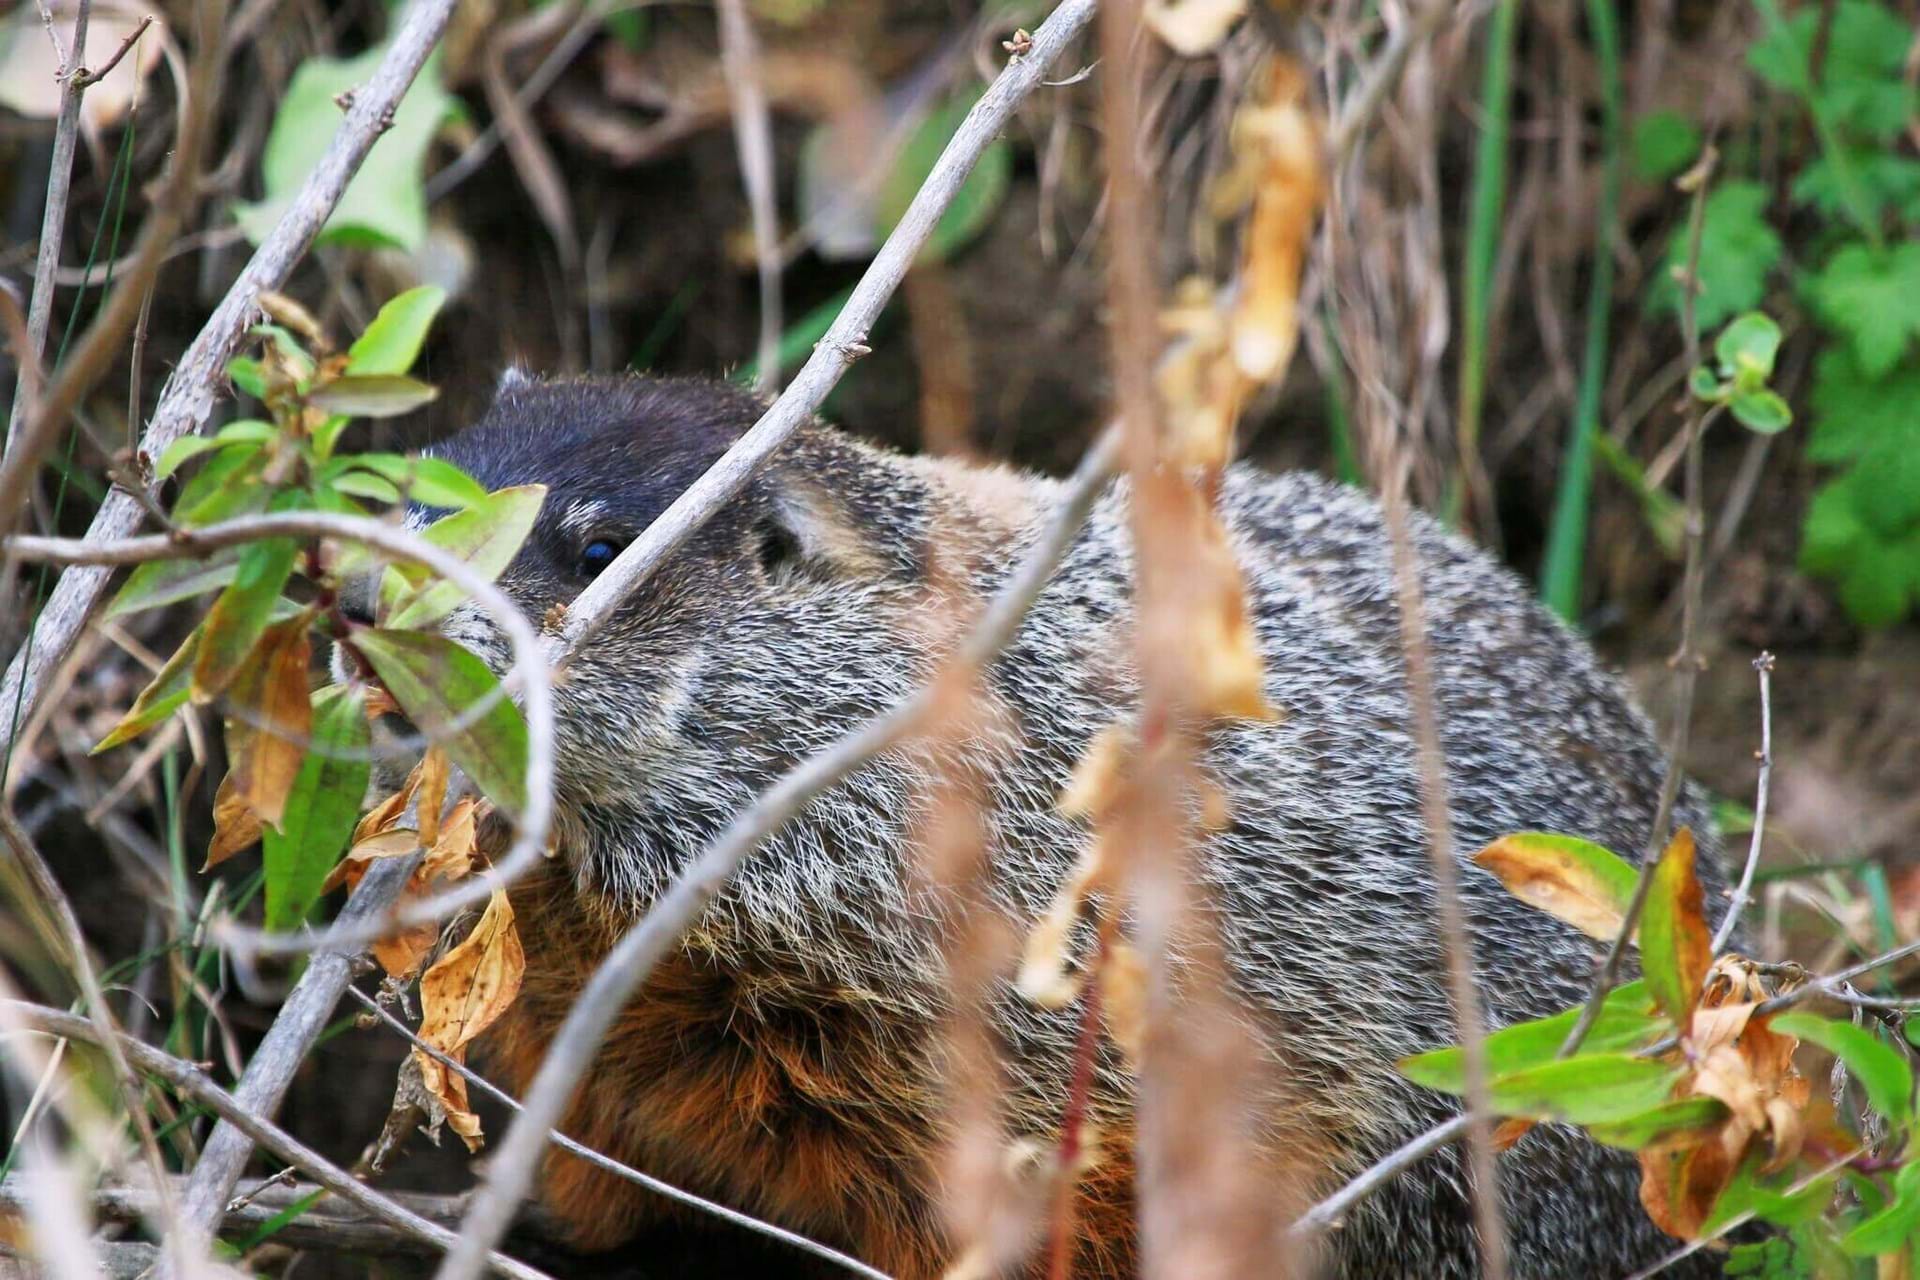 A rodent hiding behind foliage